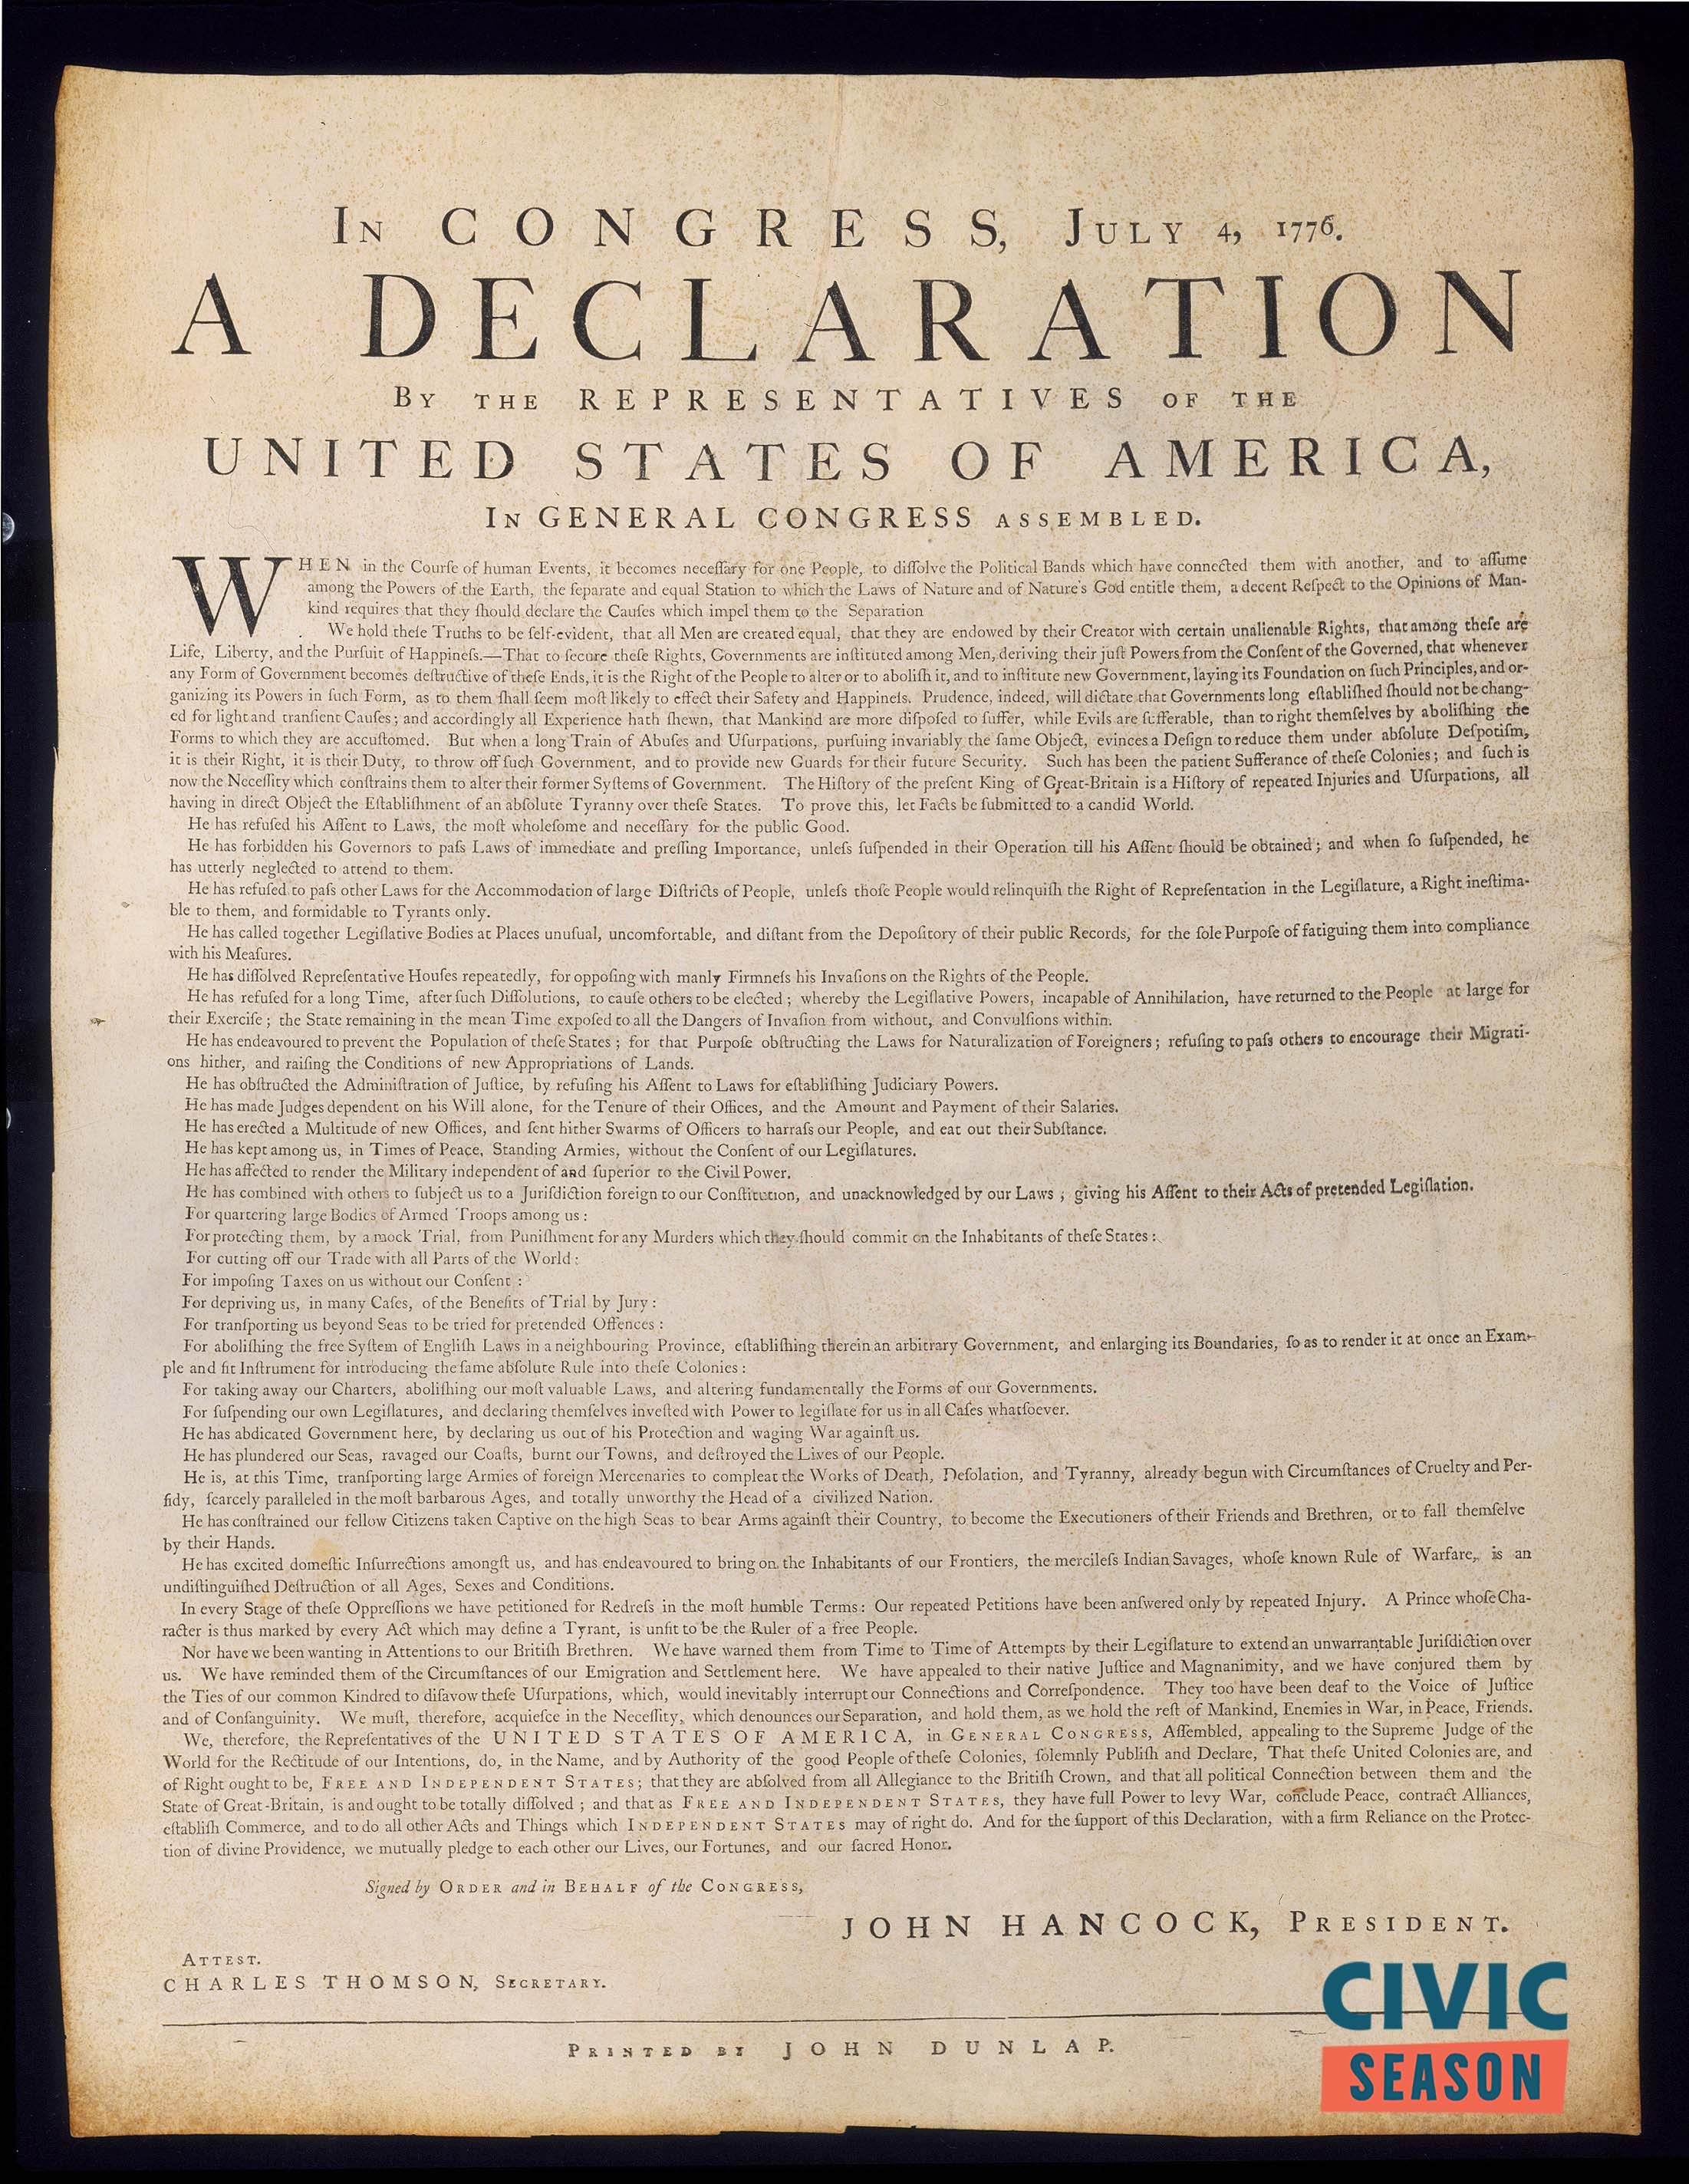 An image of the Declaration of Independence 